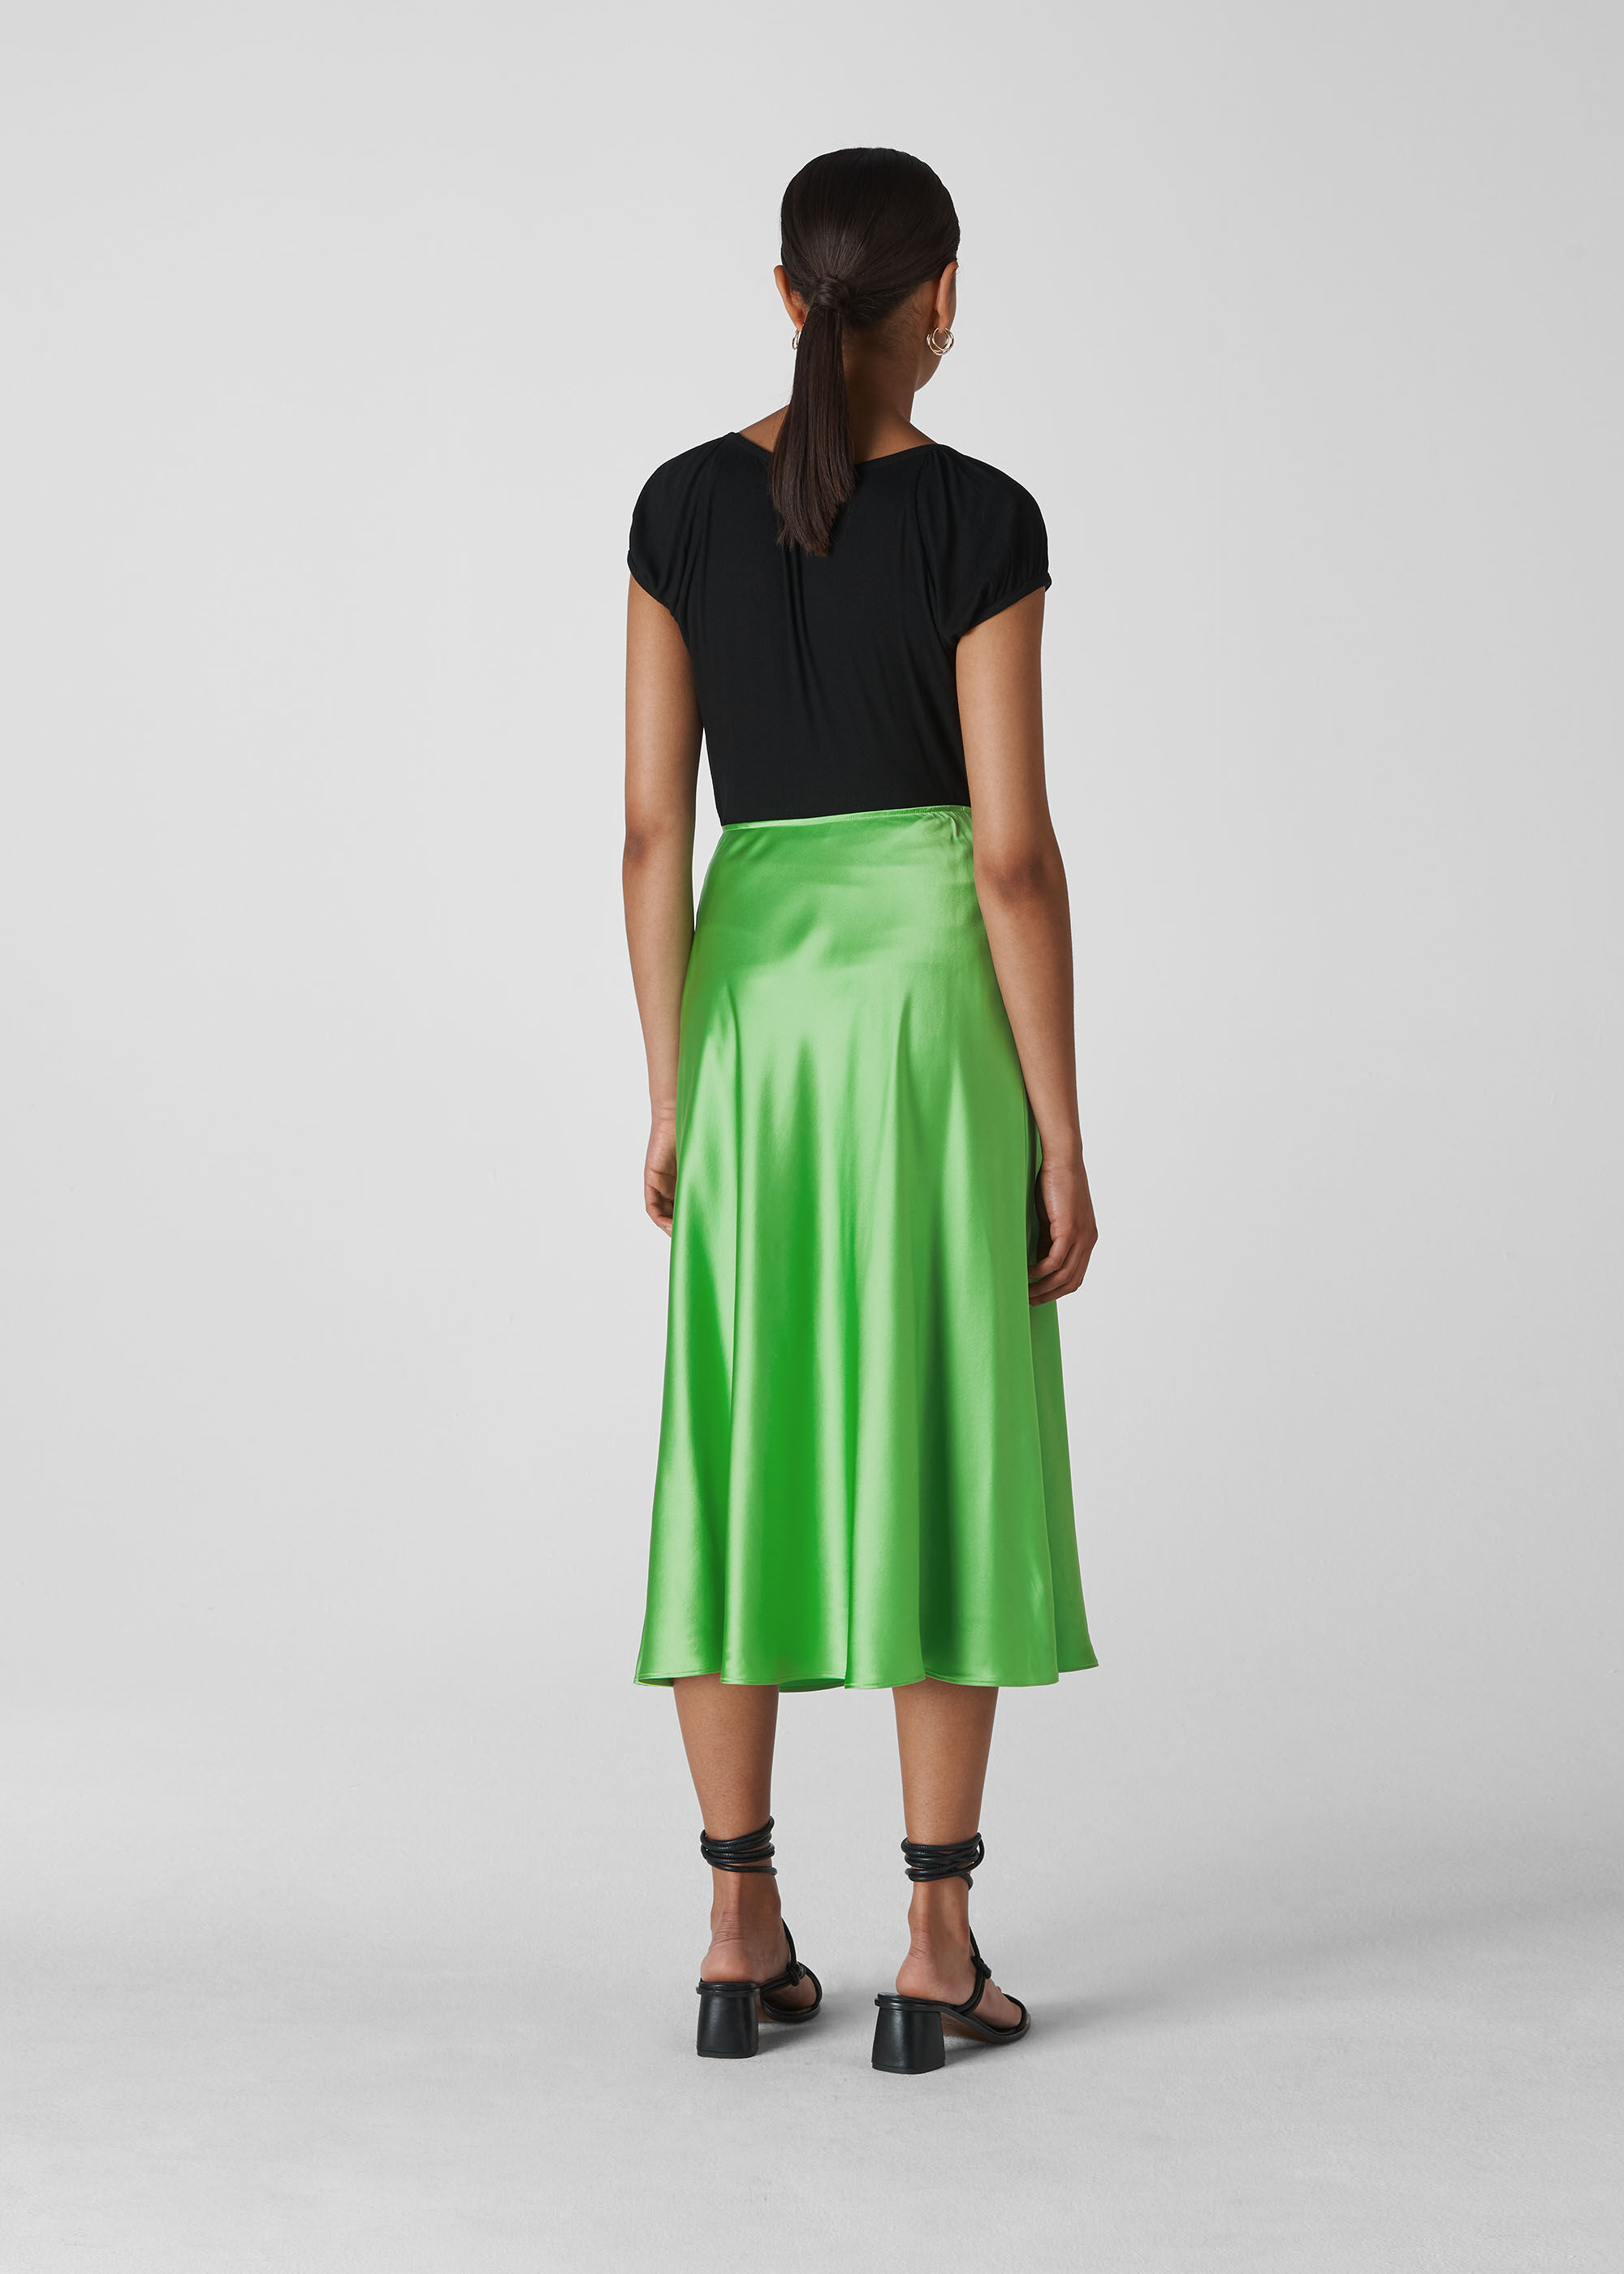 2 Ways to Wear a Bias Cut Skirt  The RELM  Co